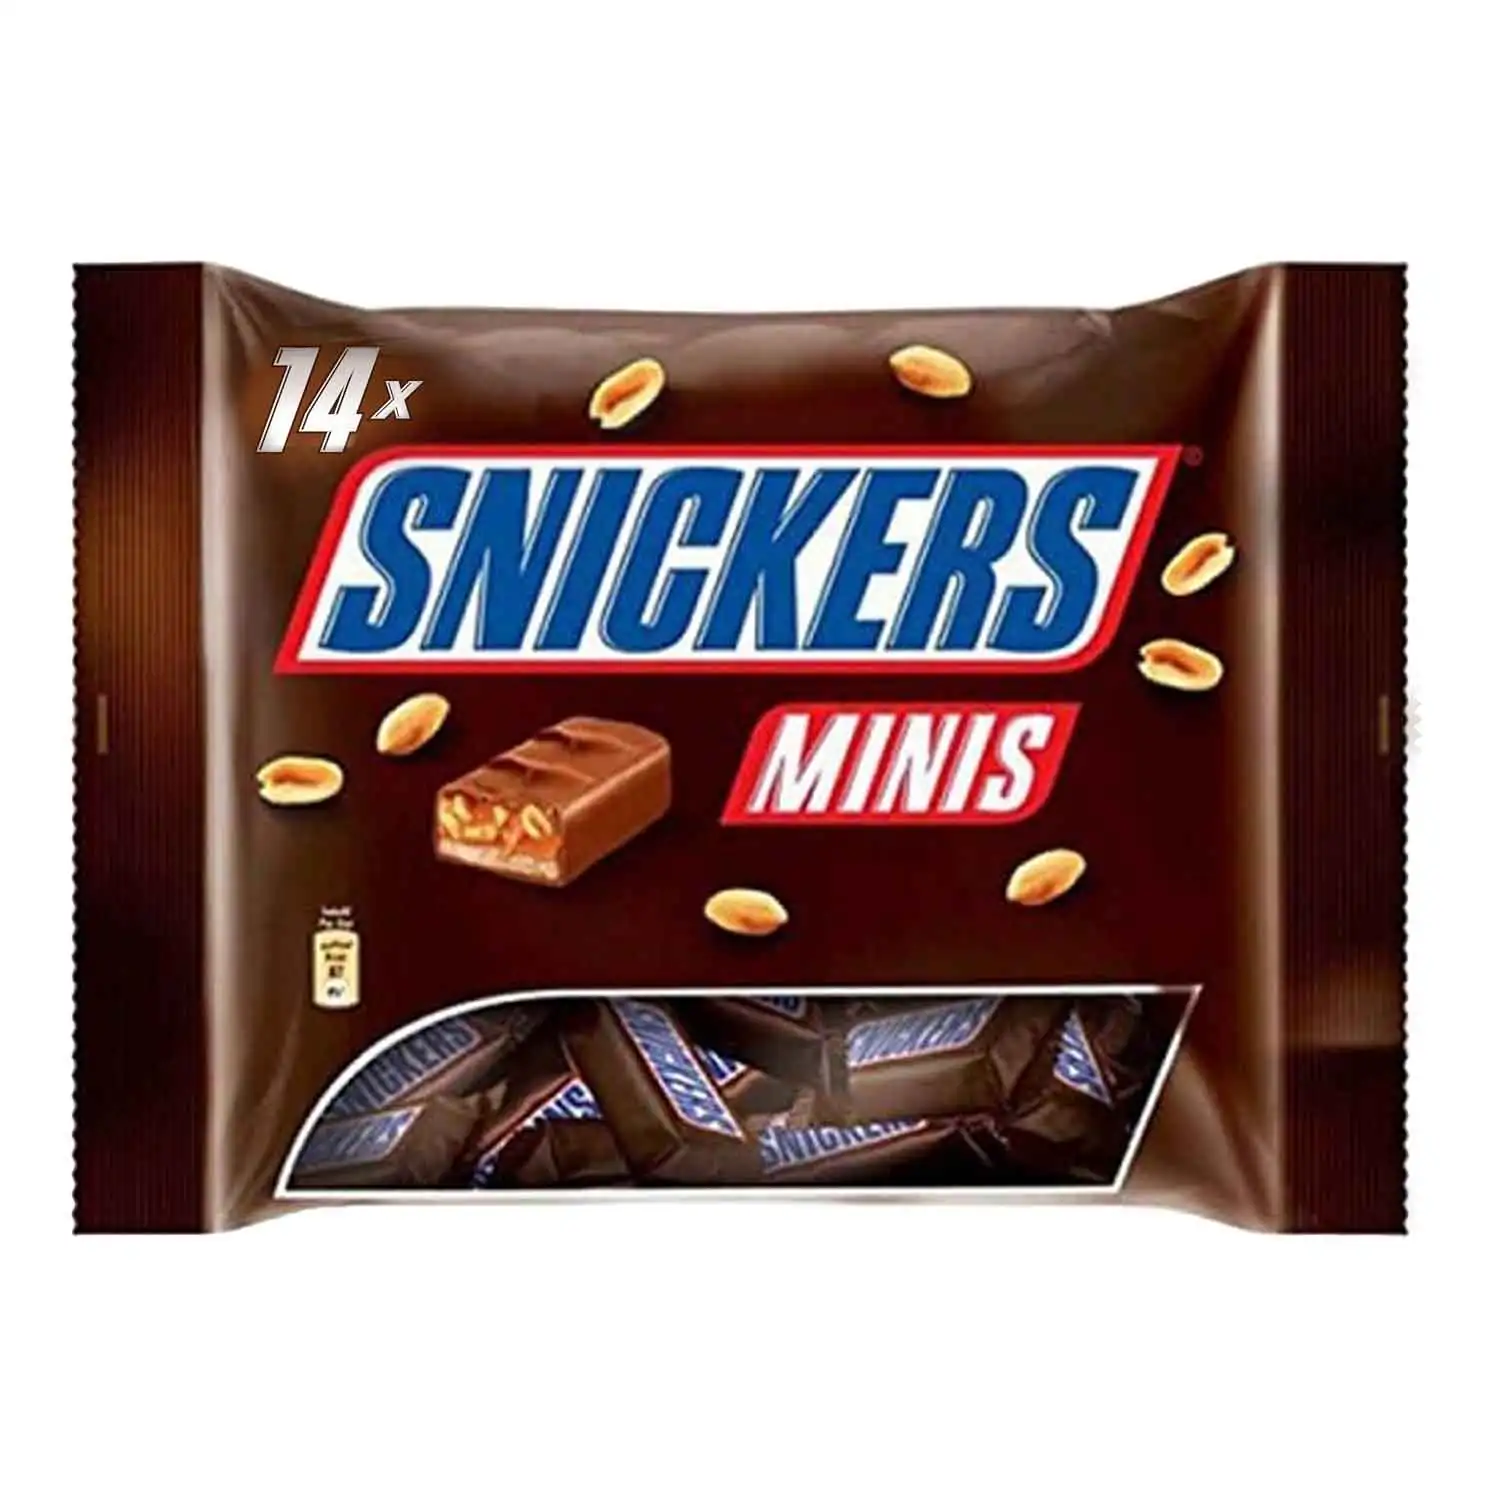 Snickers minis 275g - Buy at Real Tobacco